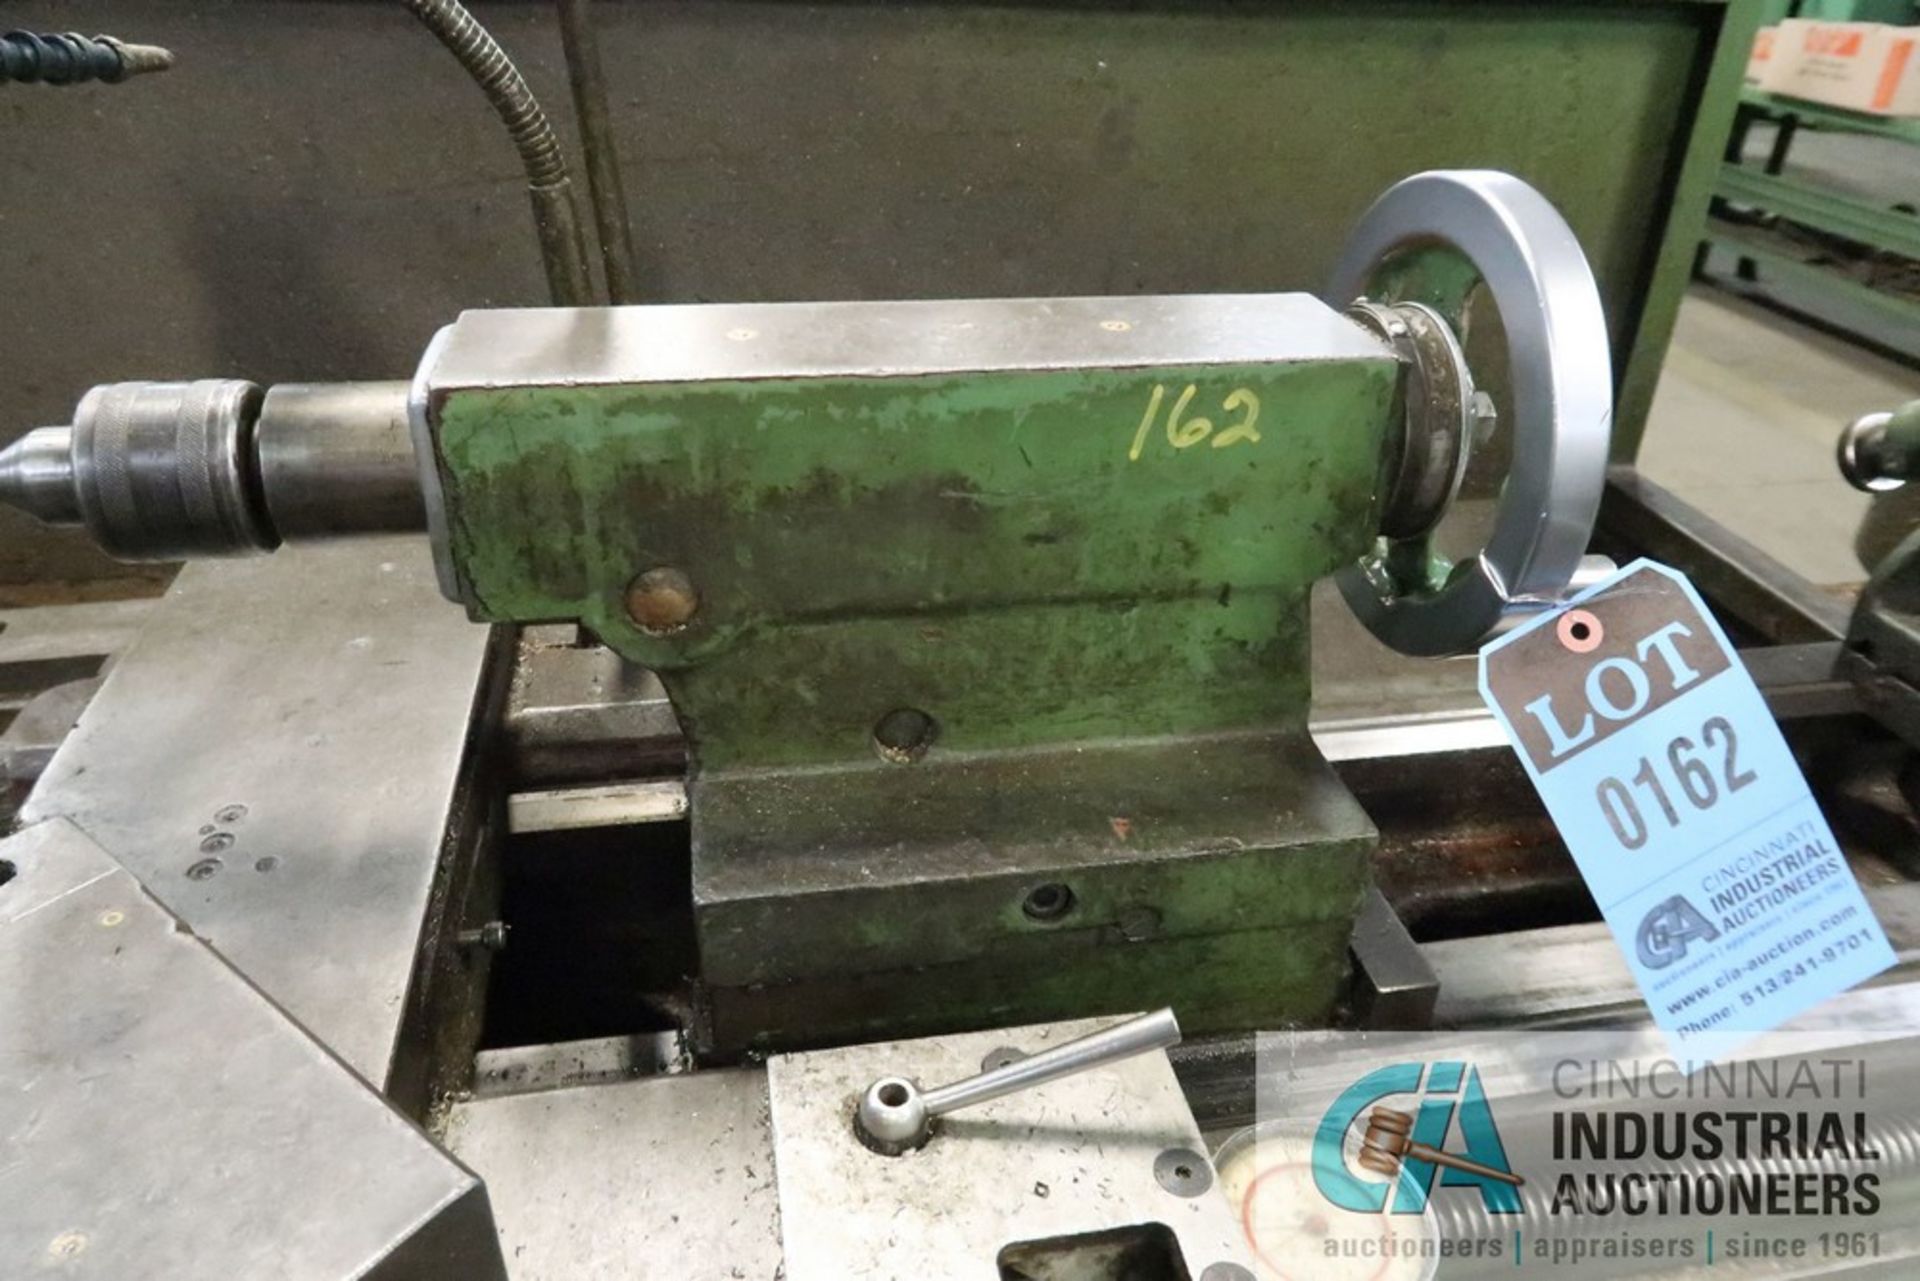 16" X 40" VICTOR MODEL 1640B PRECISION HIGH SPEED LATHE, 10" 3-JAW CHUCK, STEADY REST, TAILSTOCK, - Image 10 of 12